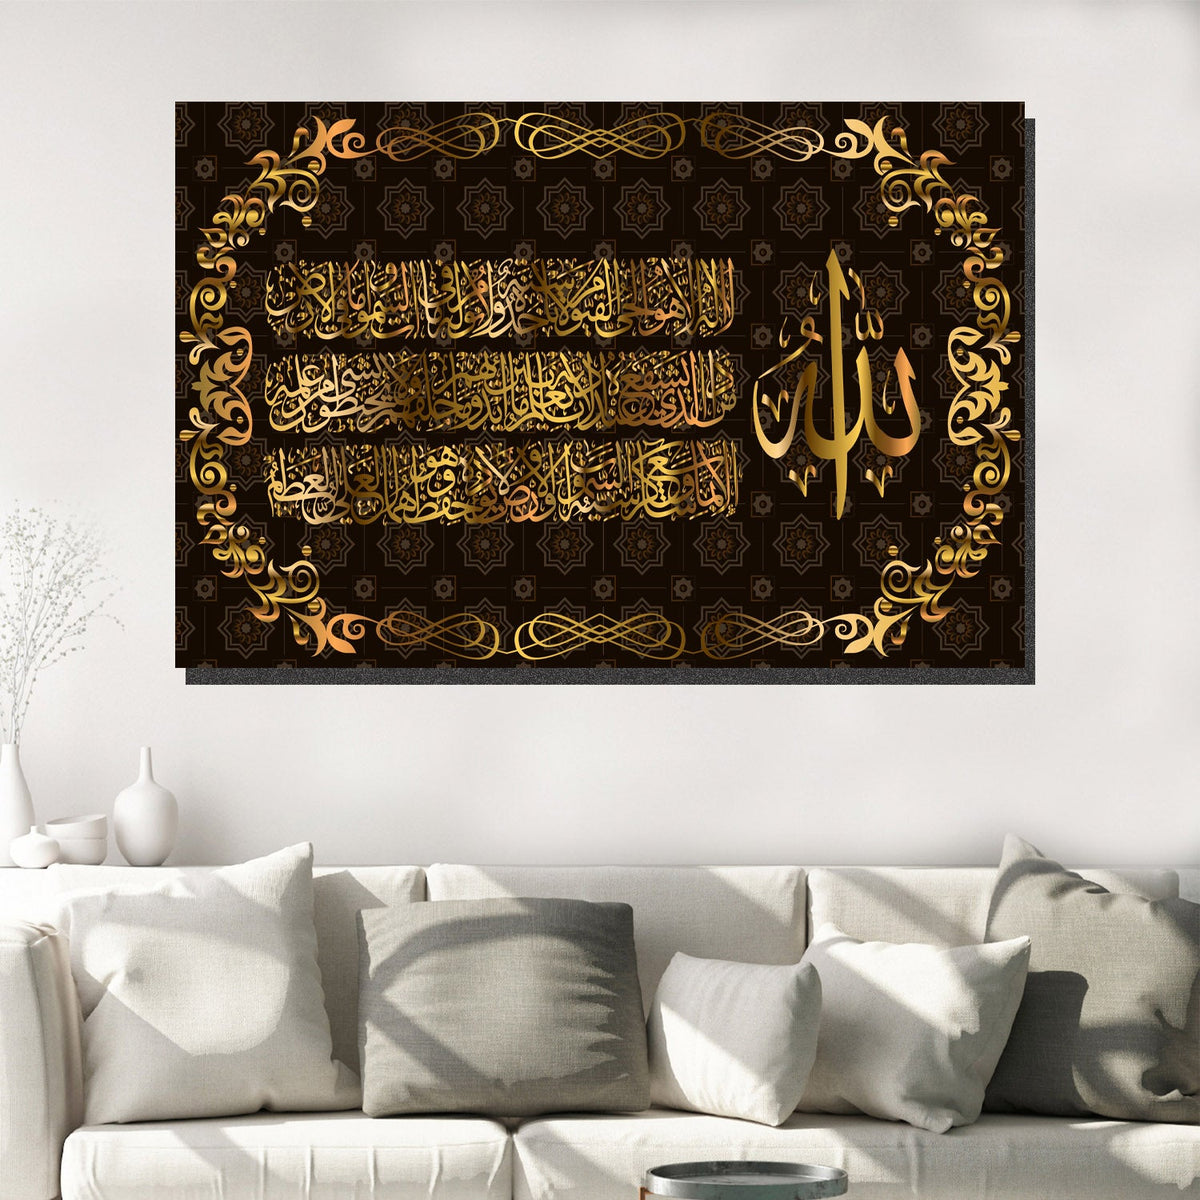 https://cdn.shopify.com/s/files/1/0387/9986/8044/products/ThroneofAllahCanvasArtprintStretched-4.jpg